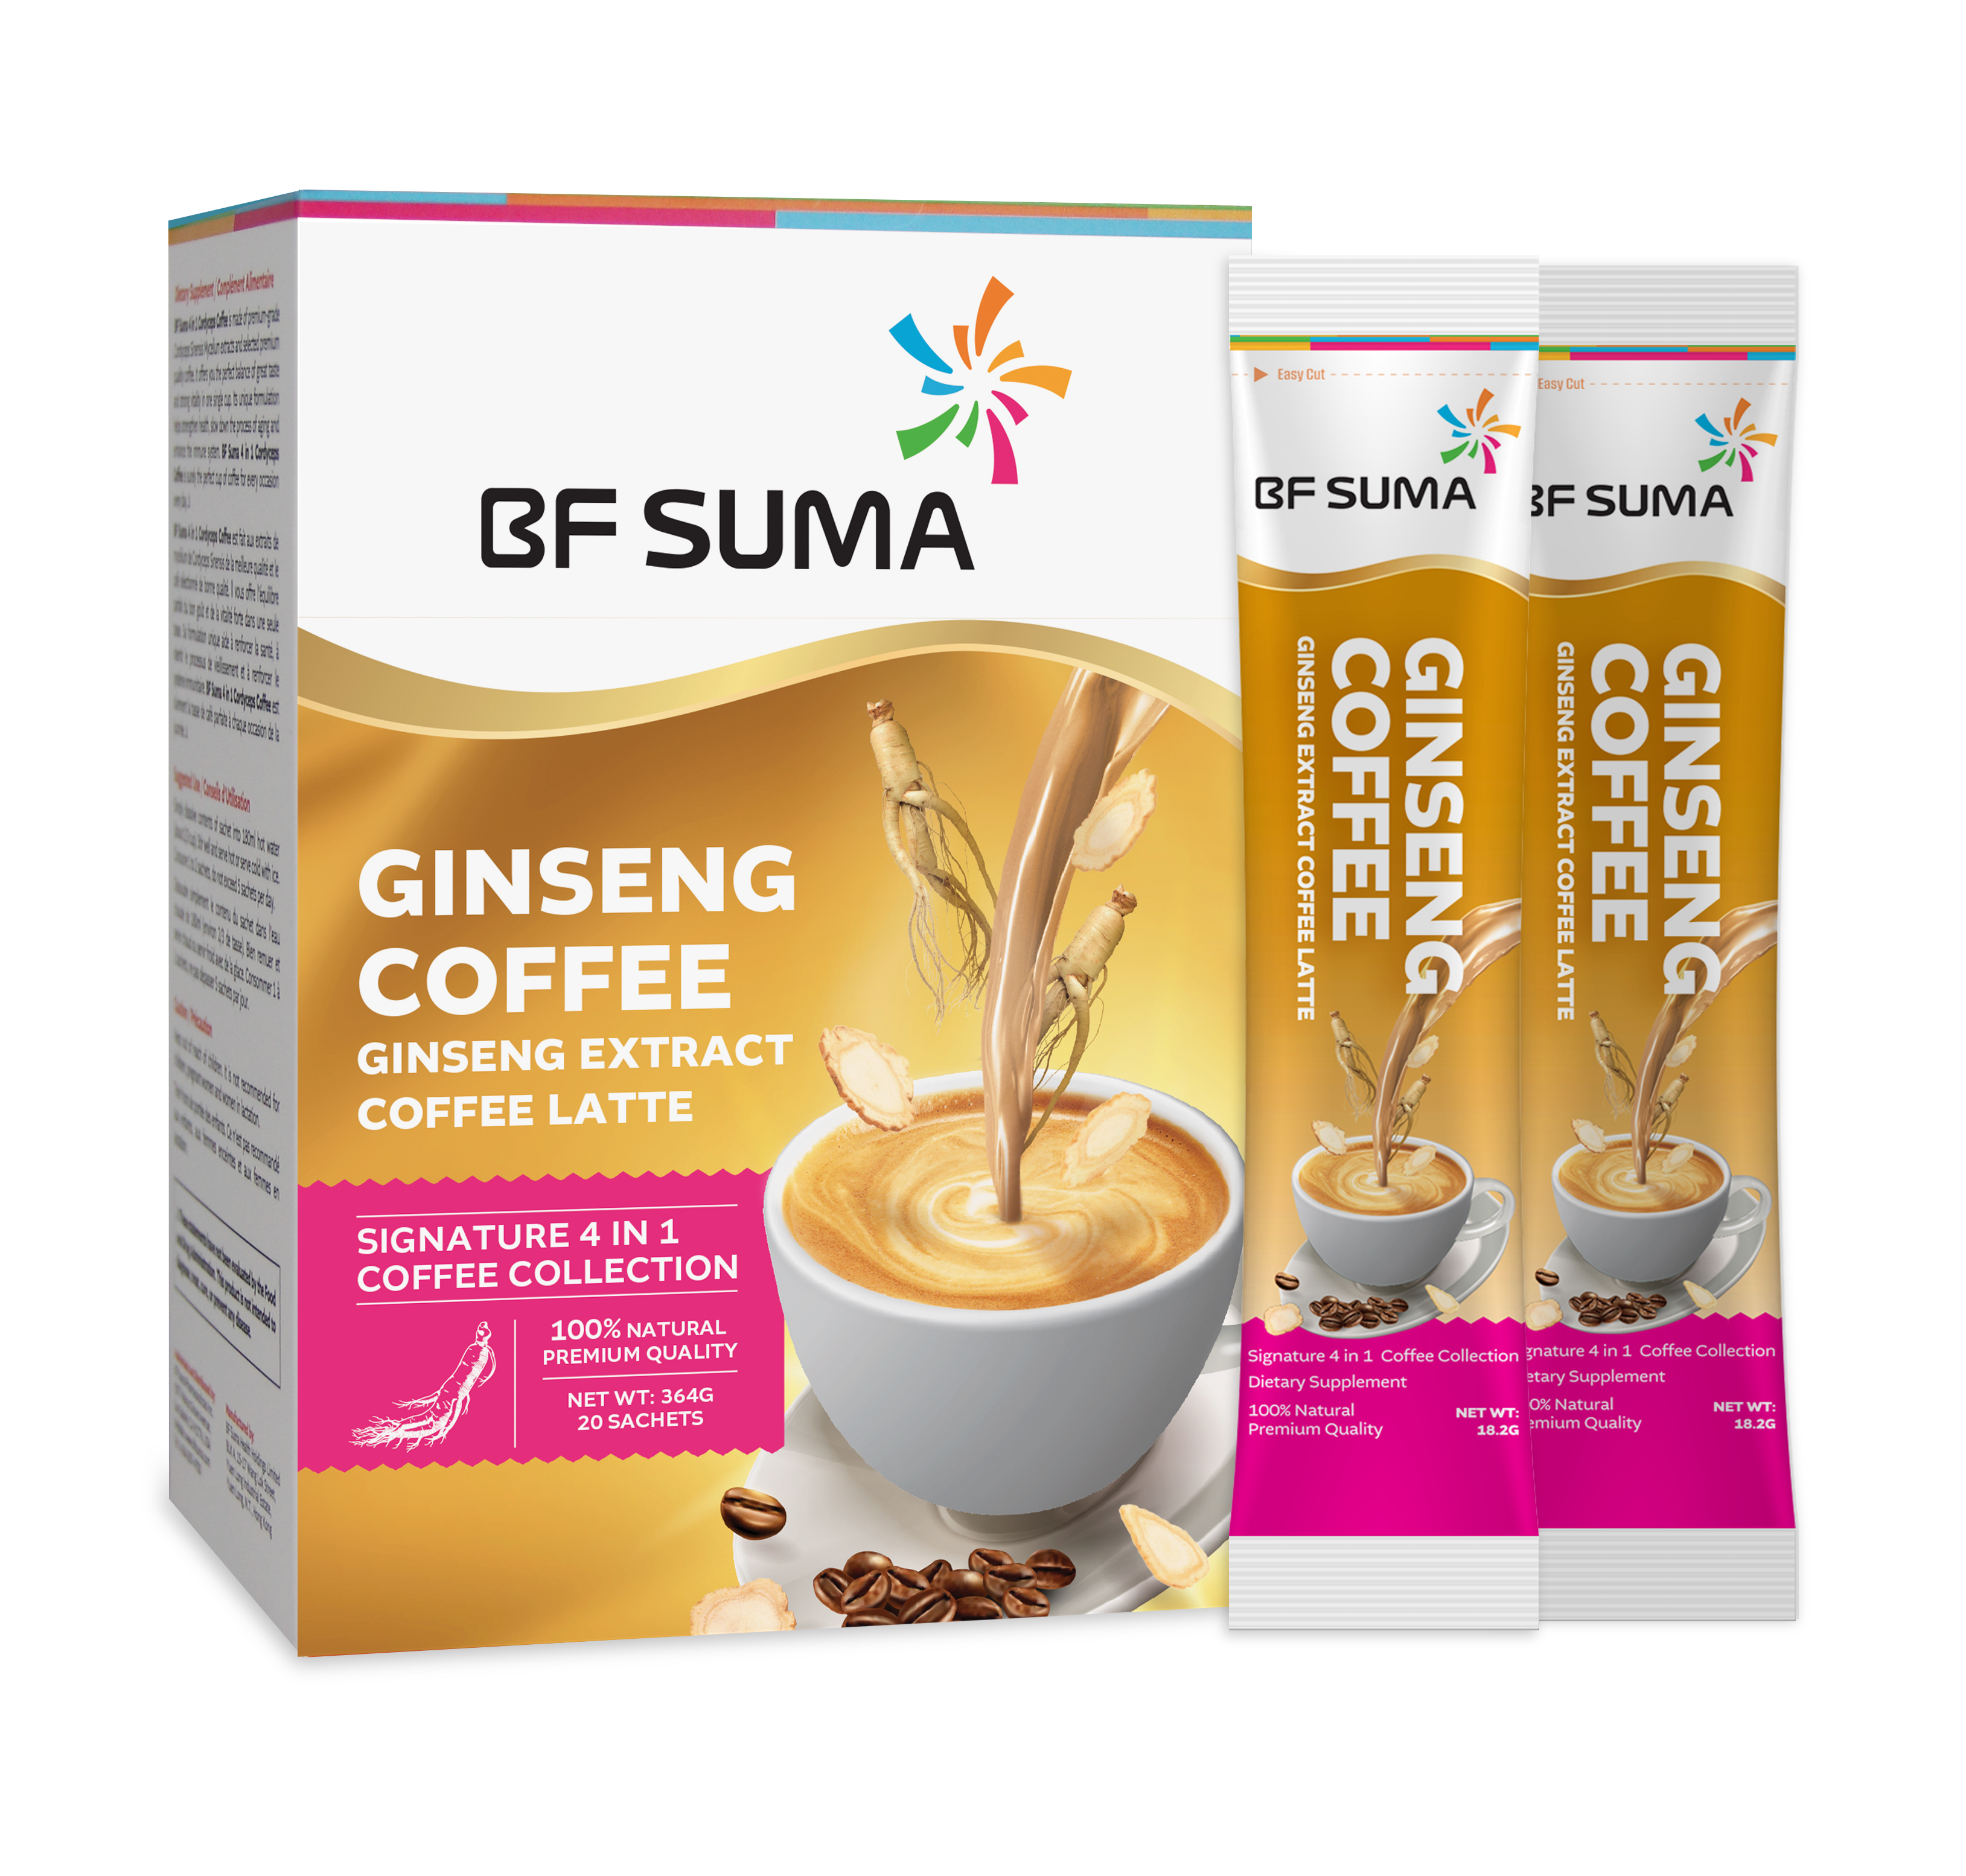 4 in 1 Ginseng Coffee 四合一人蔘咖啡